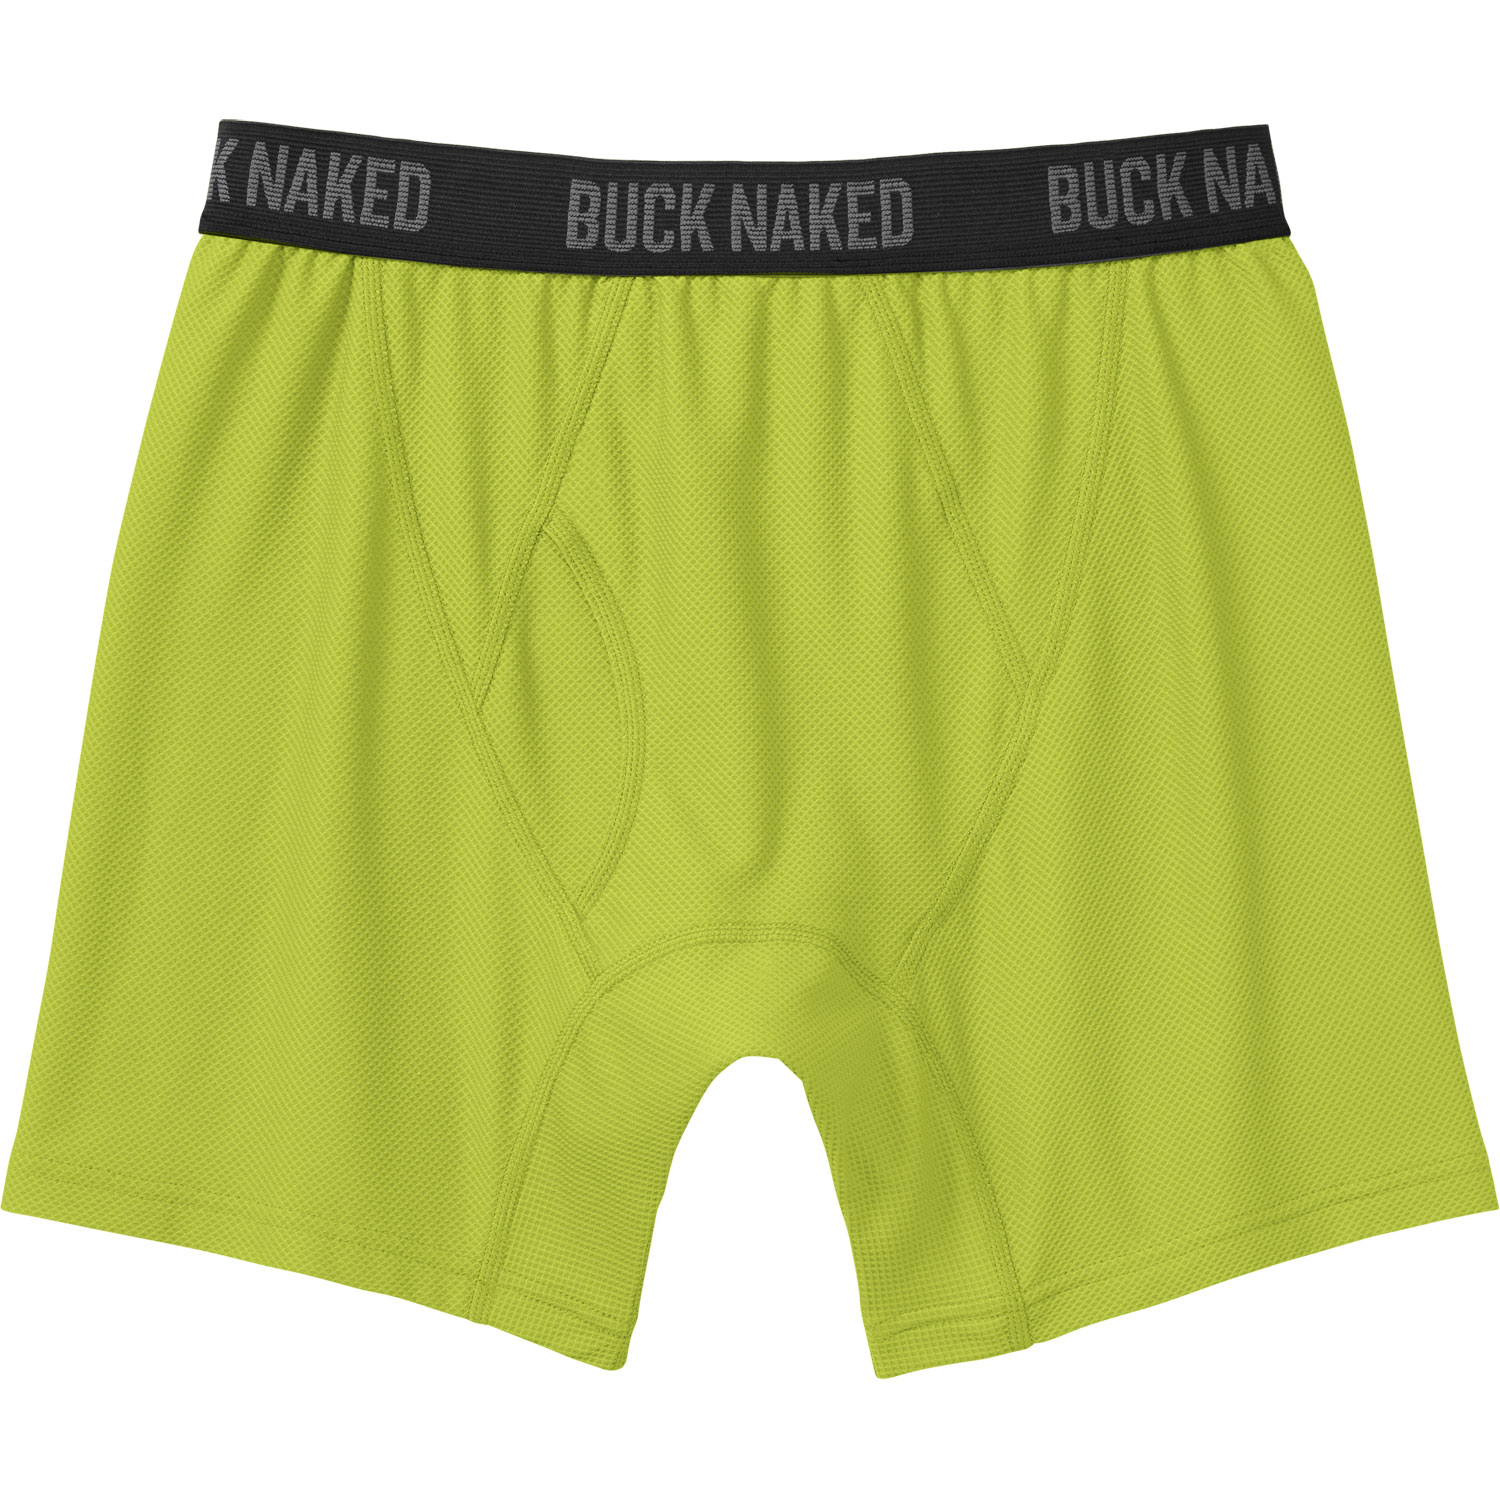 Duluth Trading Men's Buck Naked Boxer Briefs from $10 in cart